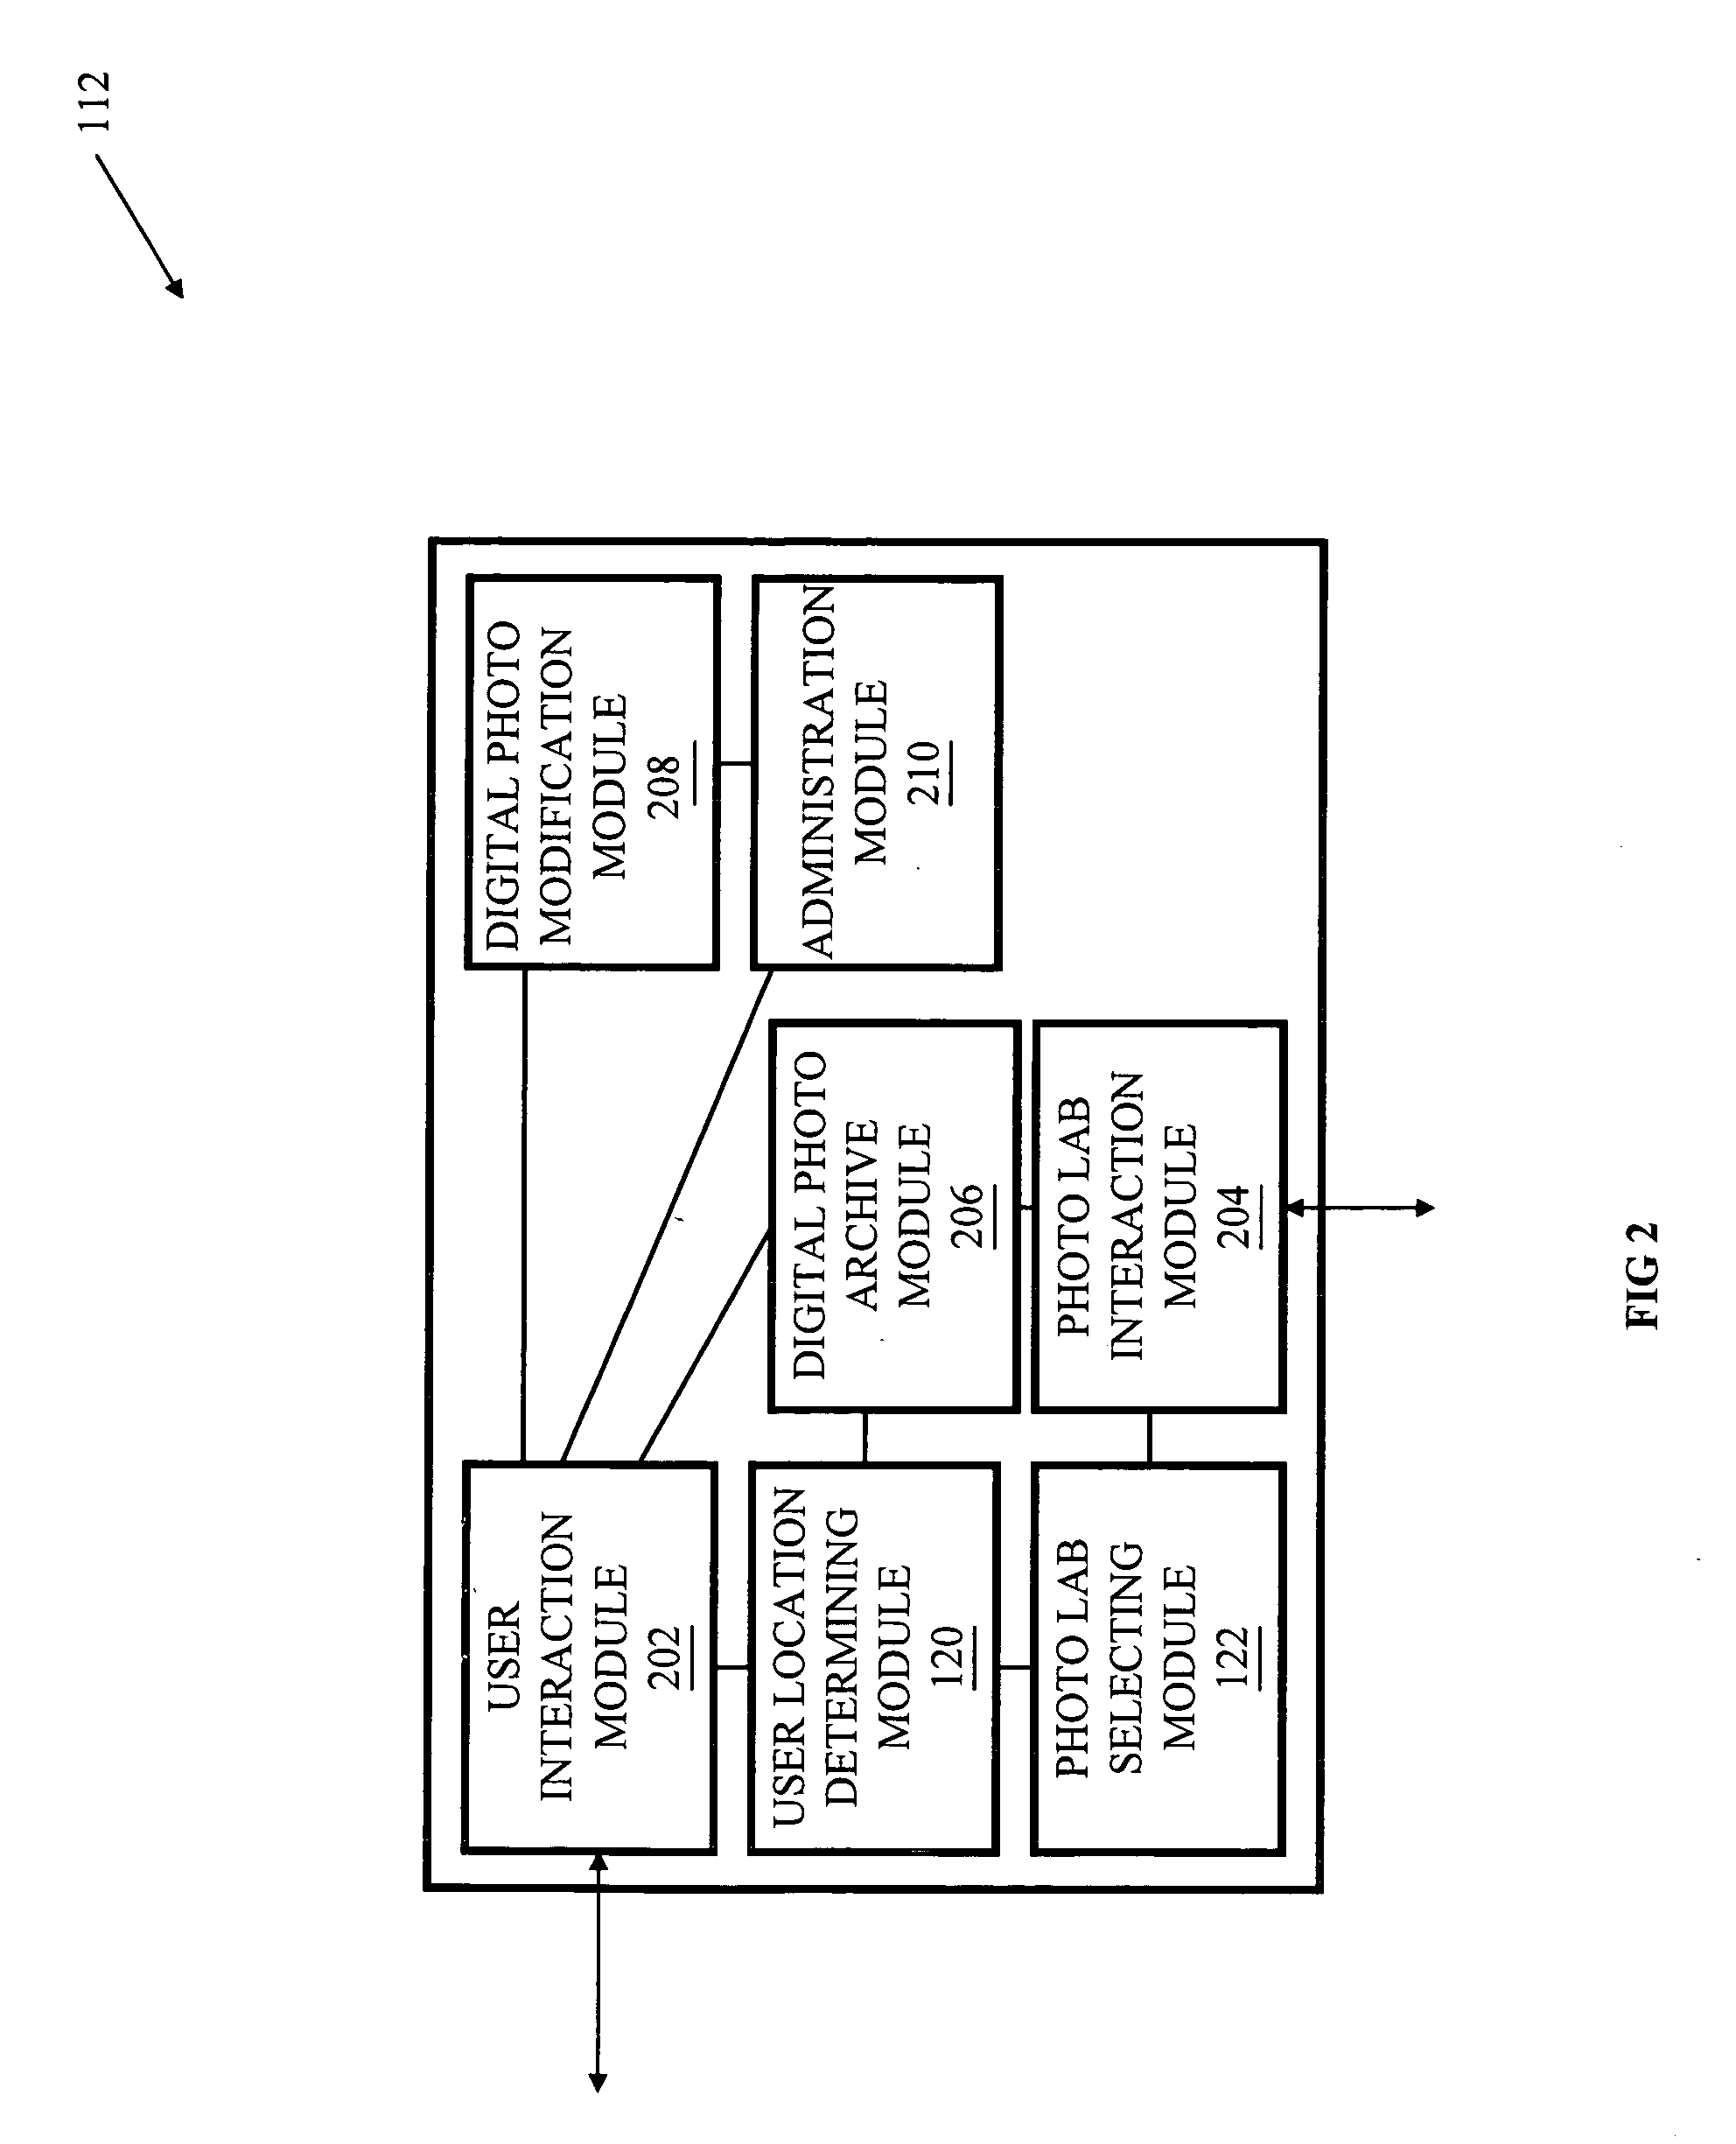 Systems, methods, and media for providing photographic printing